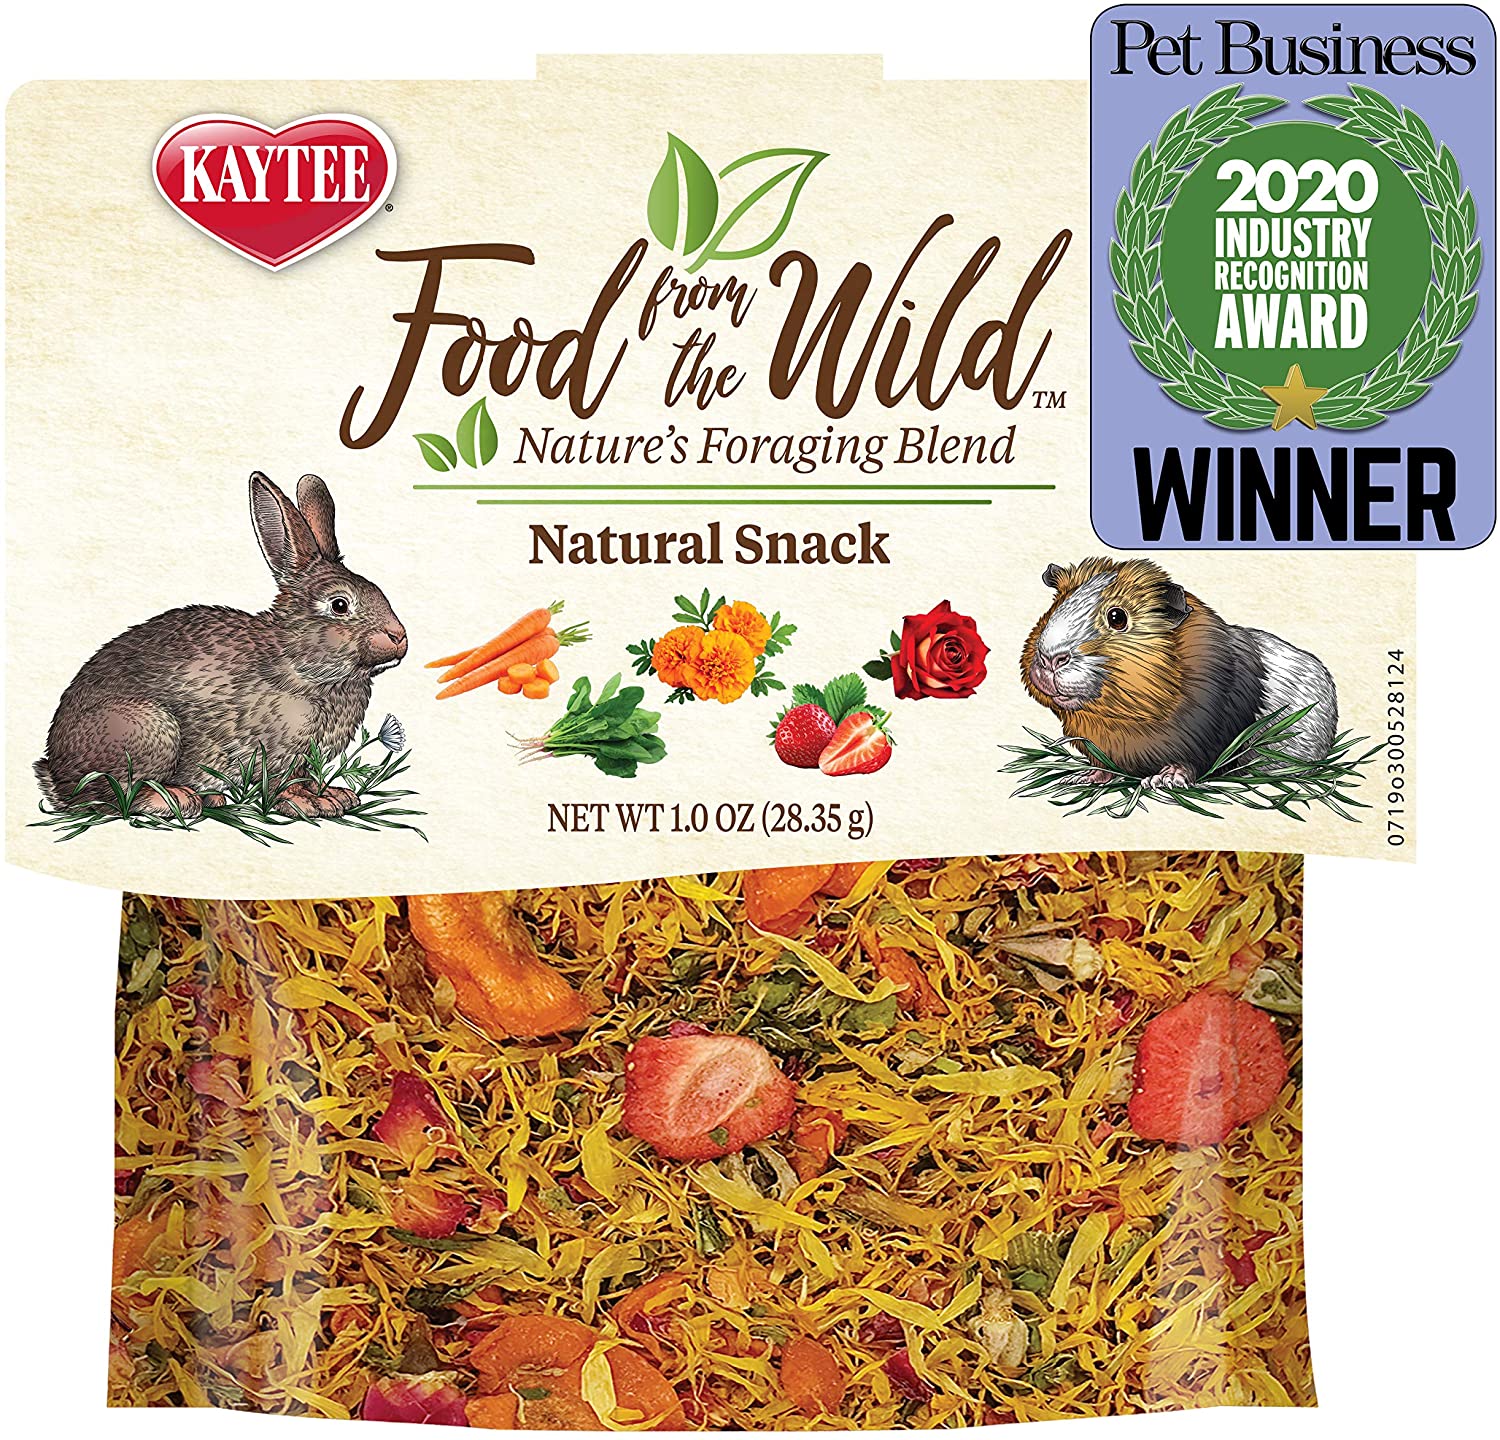 1oz. Kaytee Food from The Wild Natural Snack (Carrot, Marigold, Rose Petal, Spinach, Strawberry) $1.84 + Free Ship w/Prime